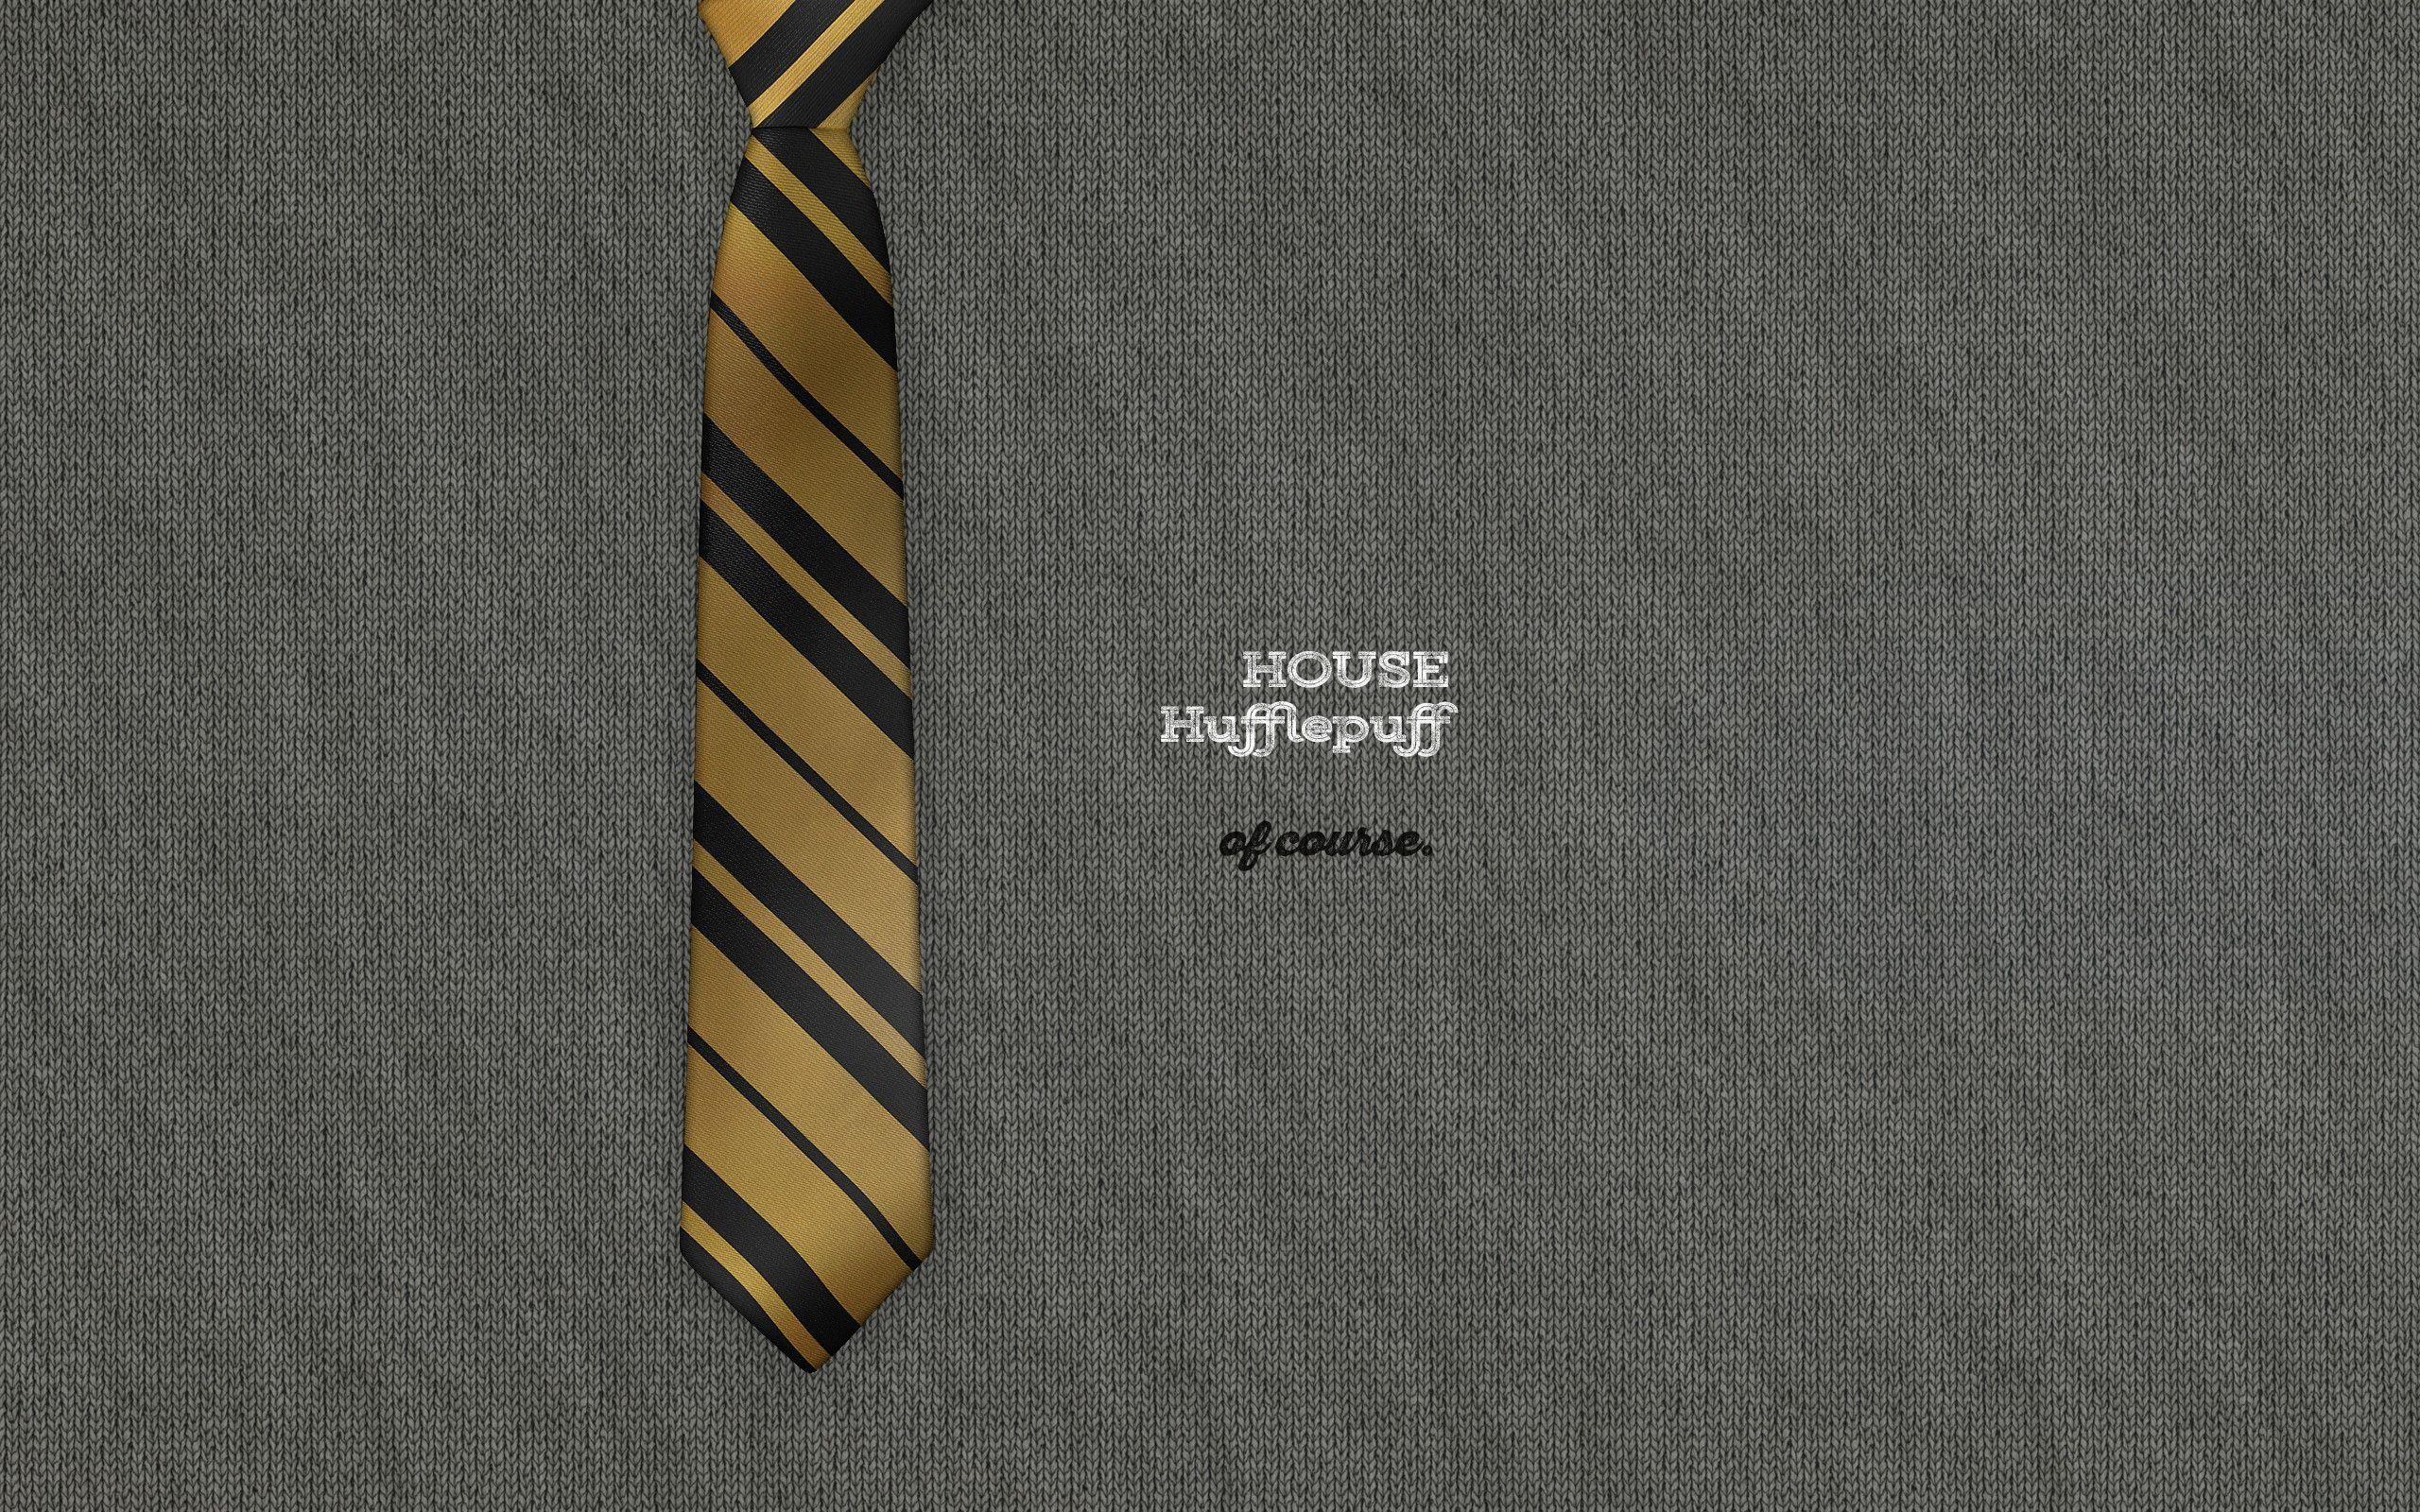 A gold and black striped tie on a grey suit. - Hufflepuff